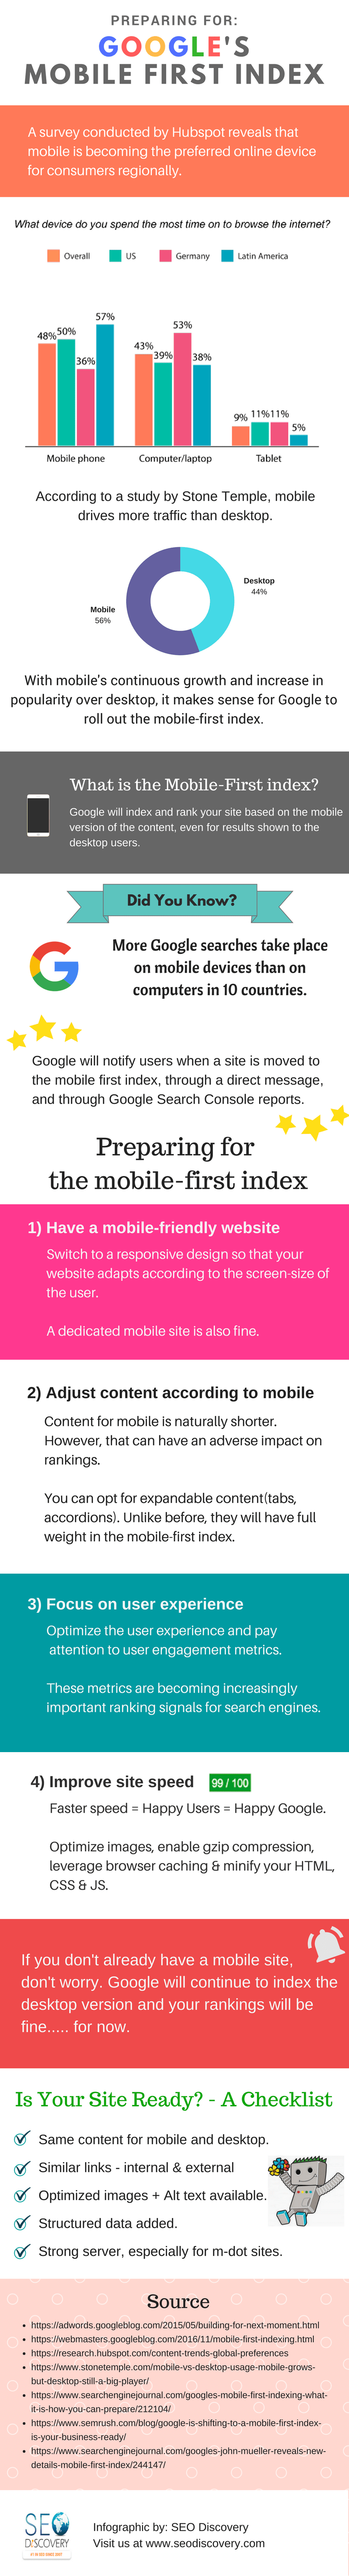 Preparing For Google’s Mobile First Index [INFOGRAPHIC]